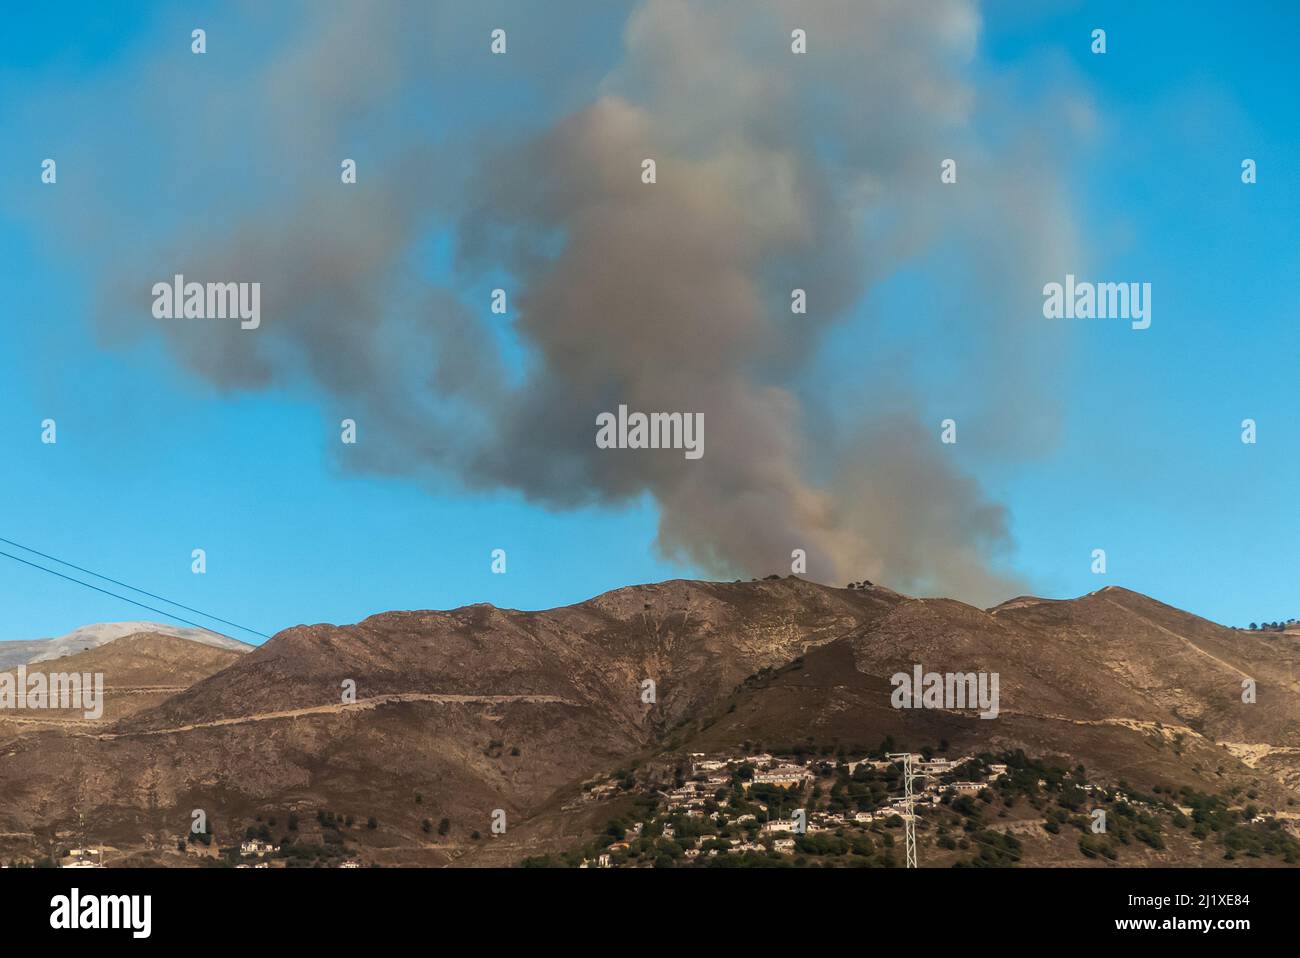 Axarquia in Spain: the December 2021 fire in the hills near Competa. Stock Photo